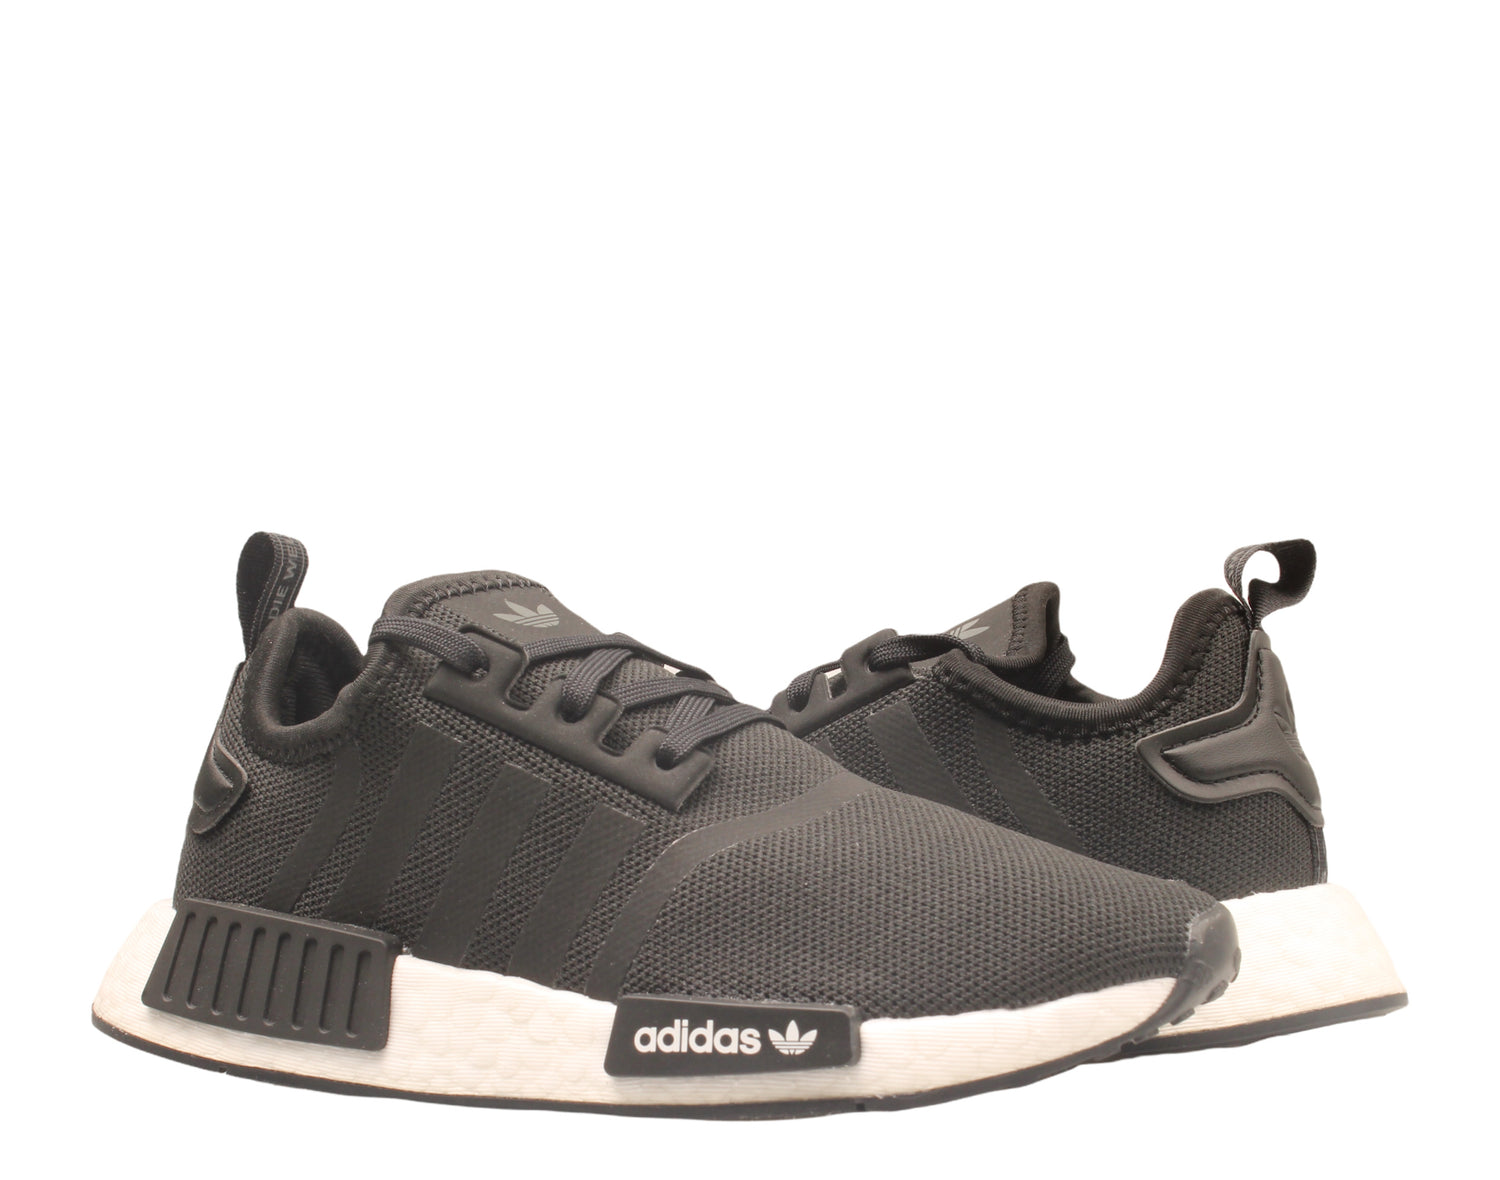 Adidas NMD_R1 C Little Kids Running Shoes